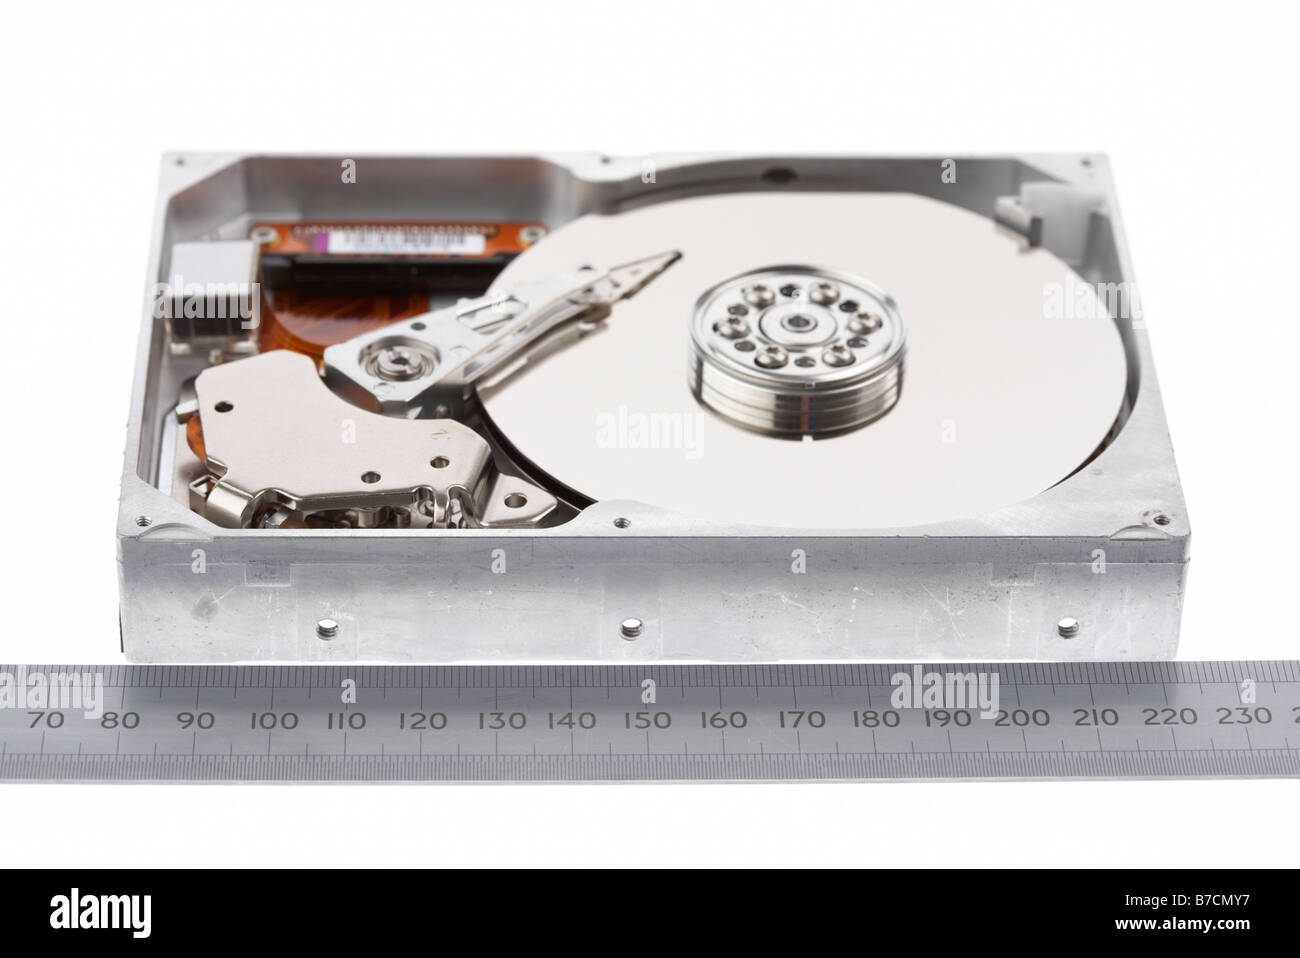 open computer hard drive on a white background next to a steel metal metric ruler Stock Photo